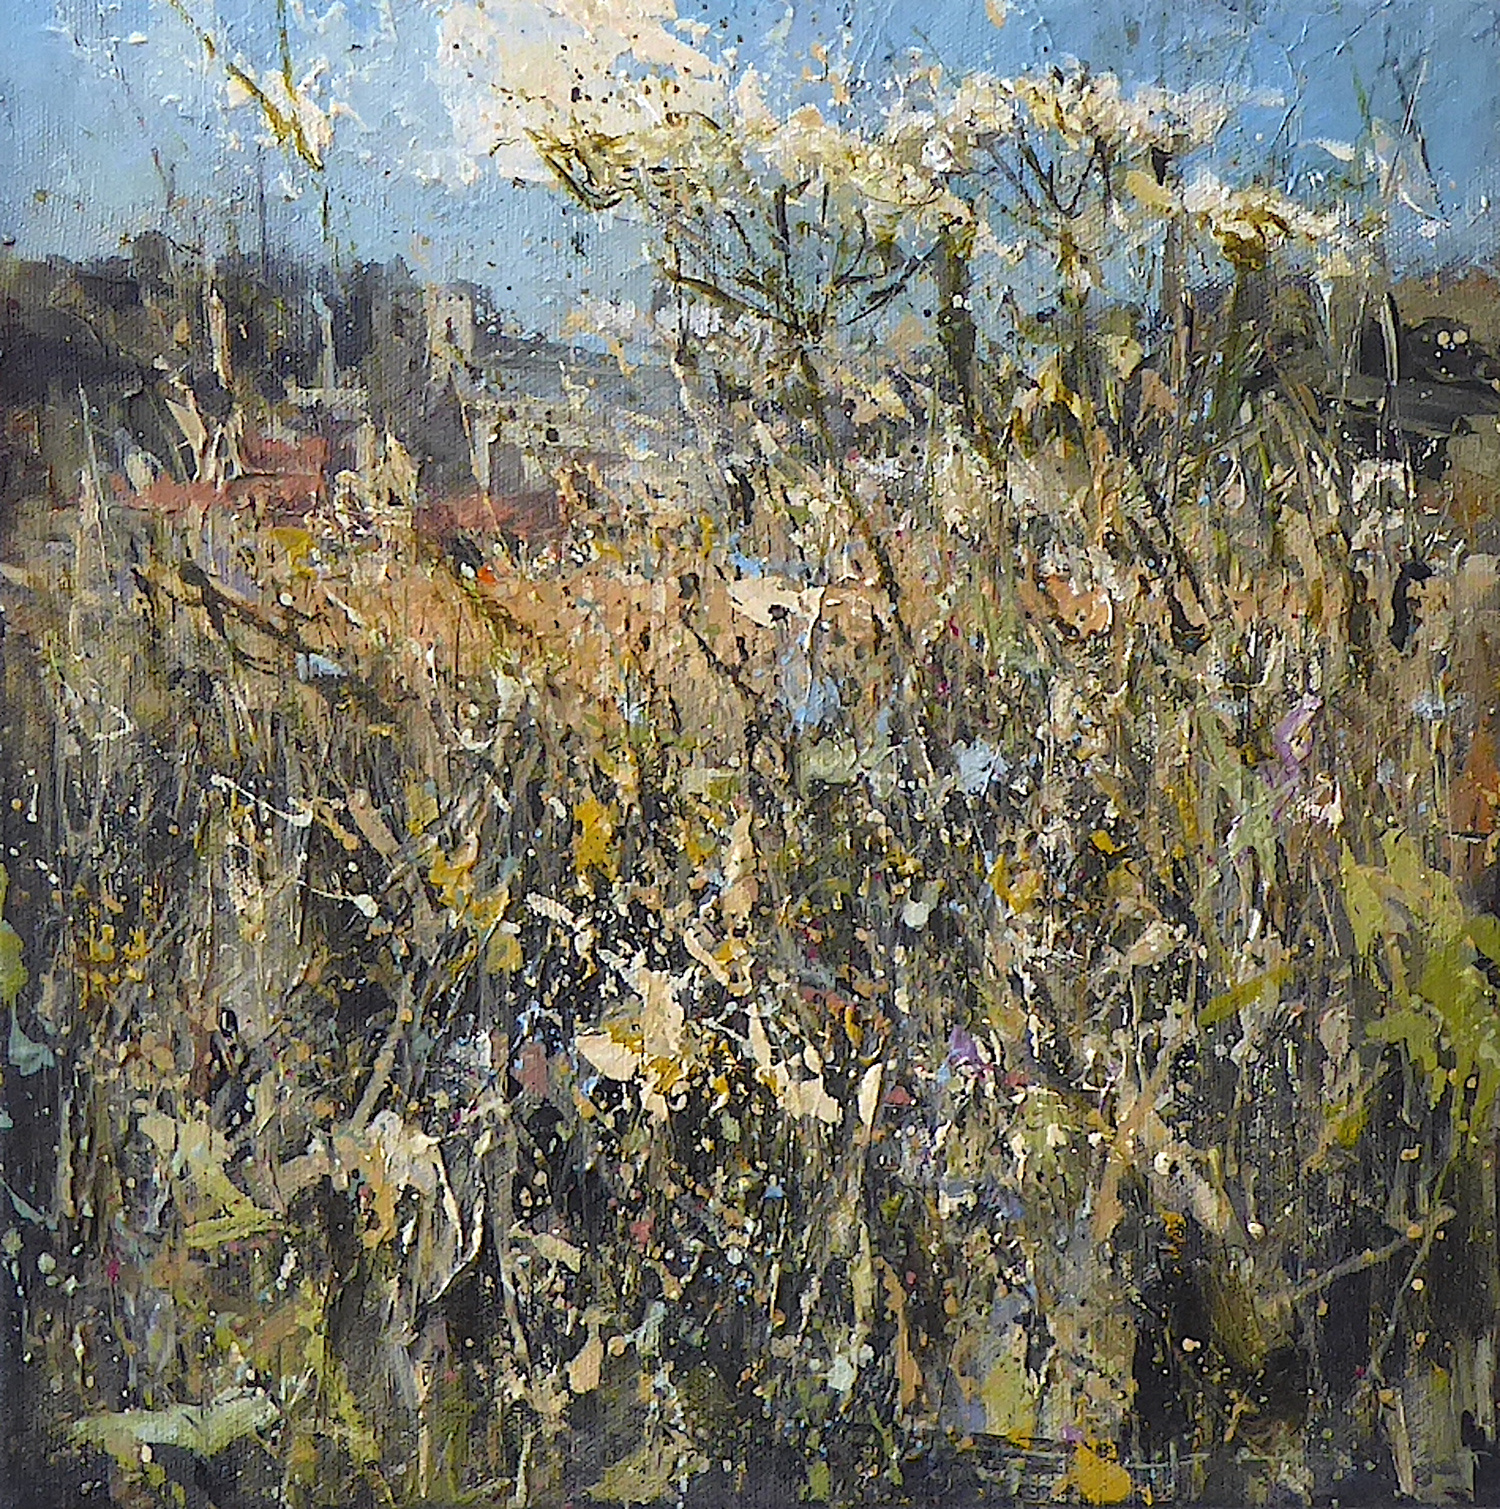 Hedgerow-Cley by Chris Prout